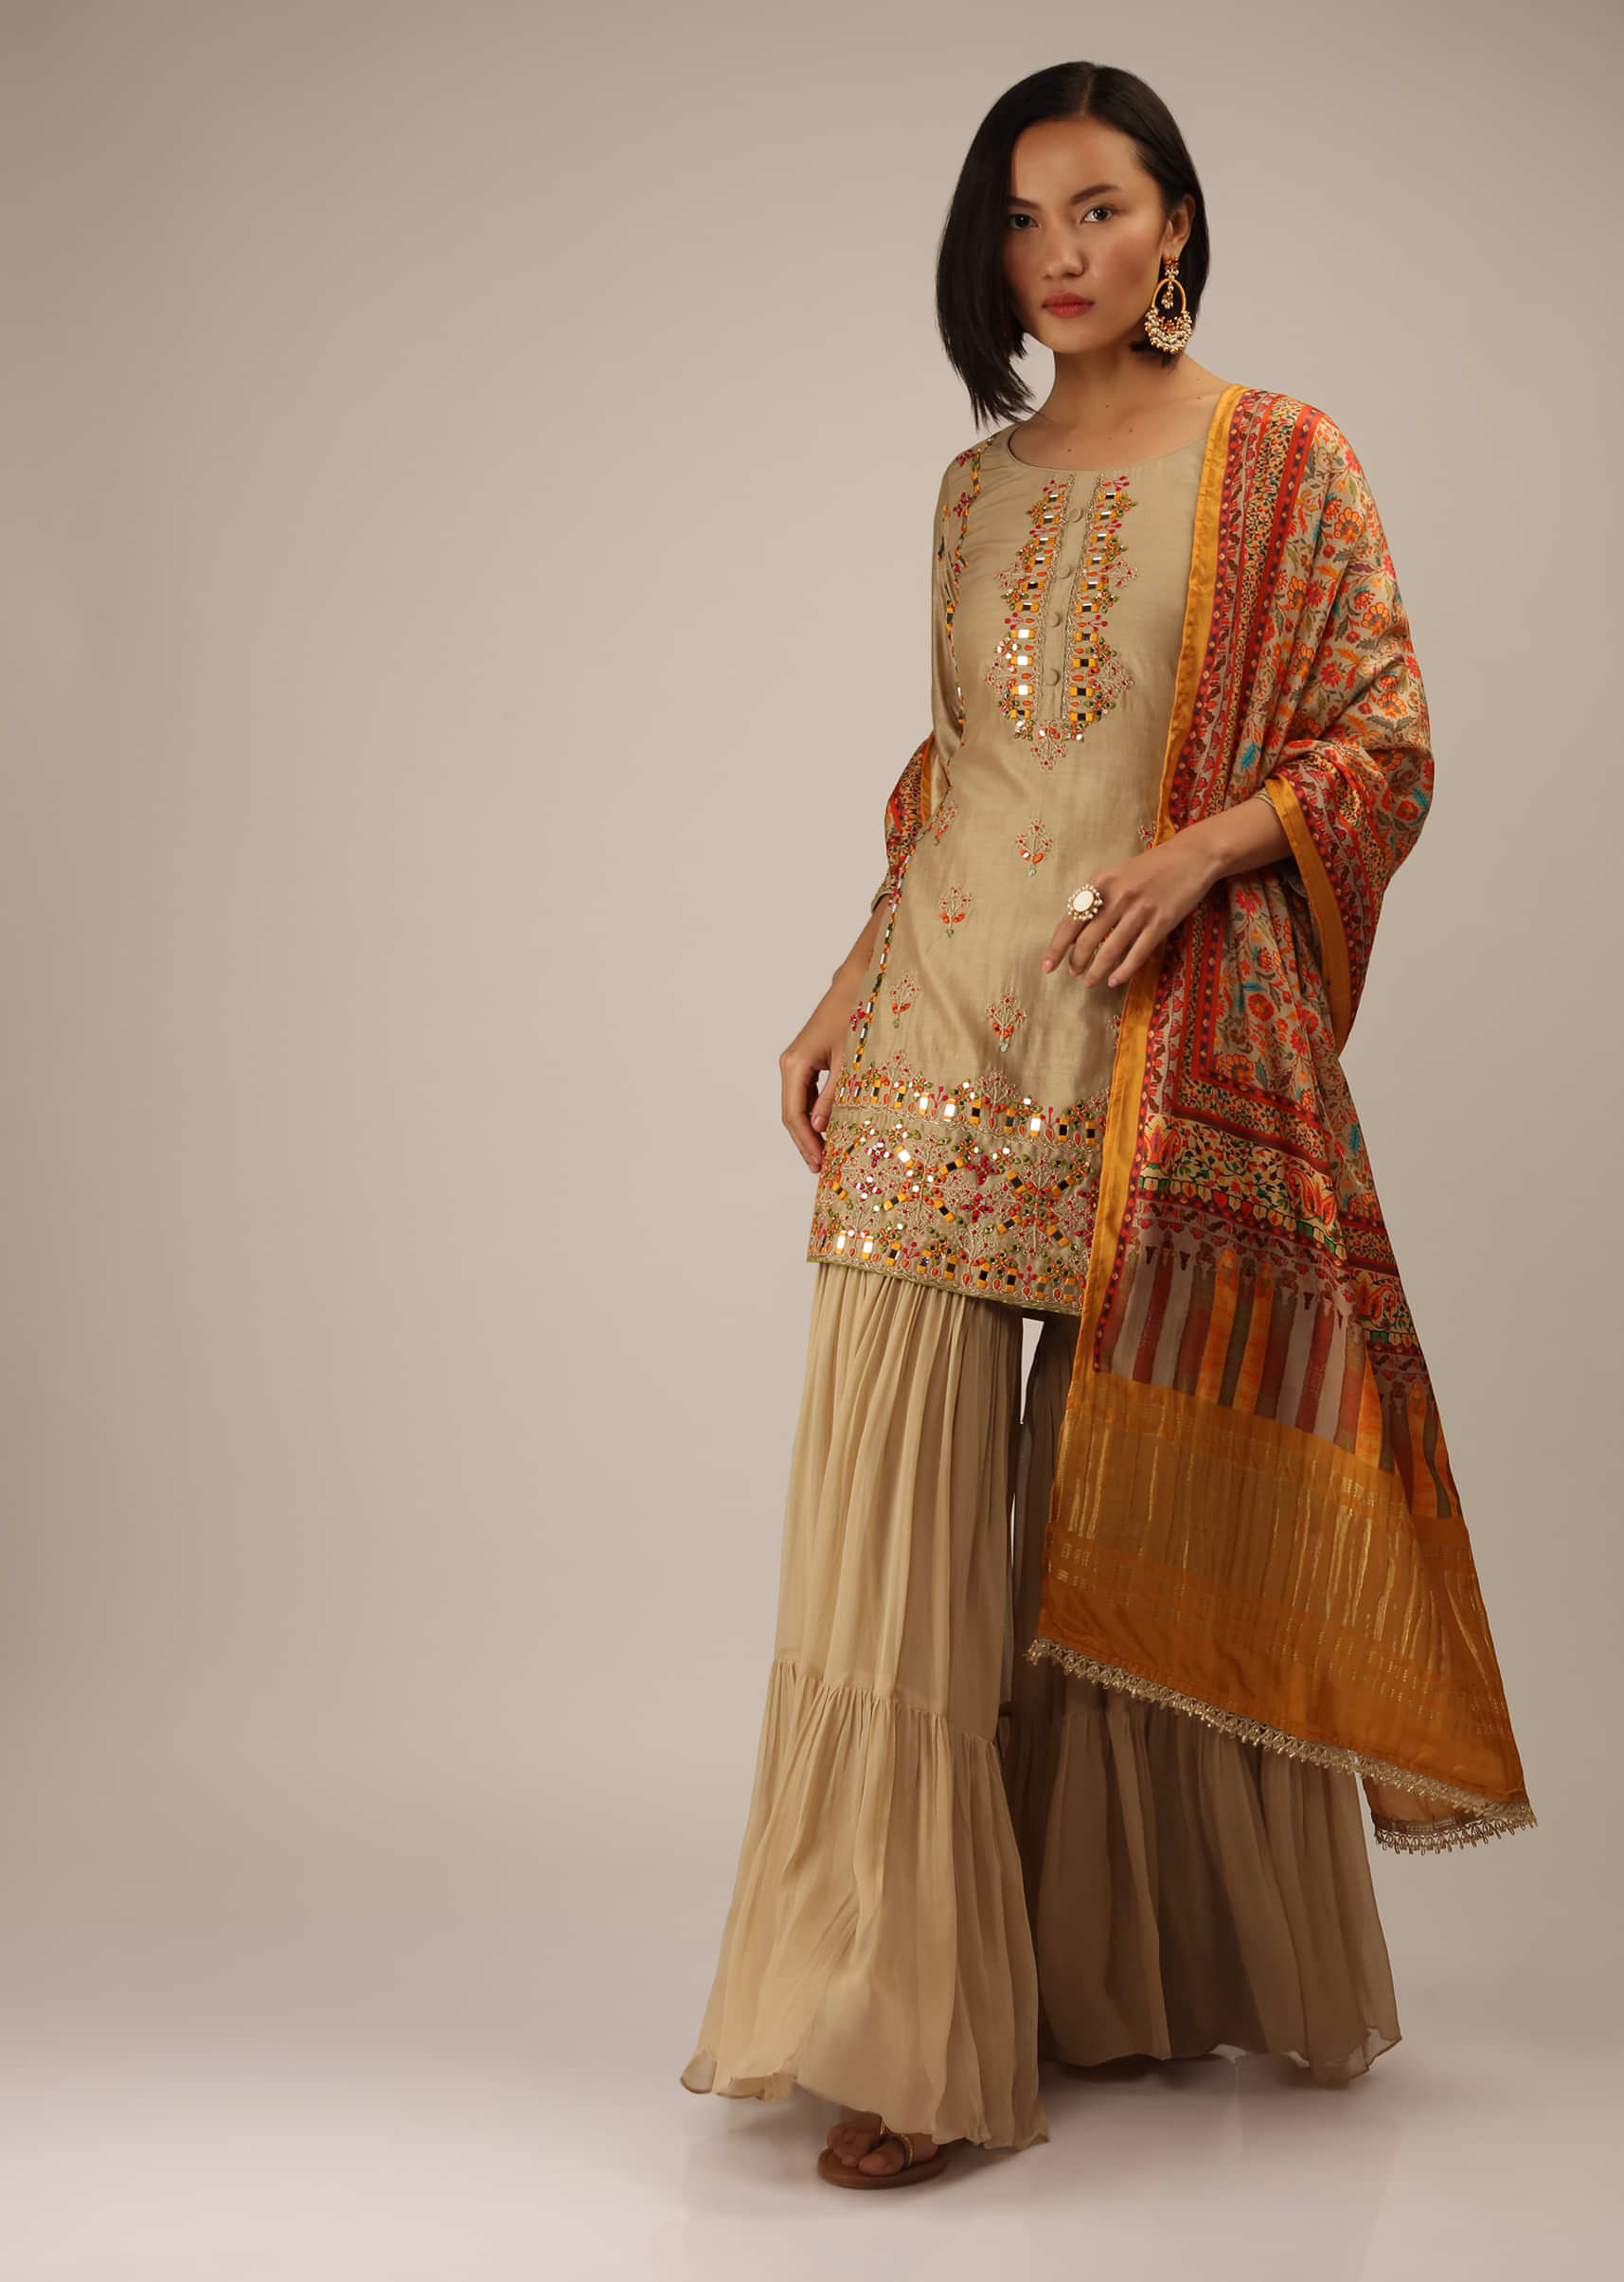 Safari Beige Sharara Suit In Cotton Silk With Multi Colored Resham And Mirror Embroidery